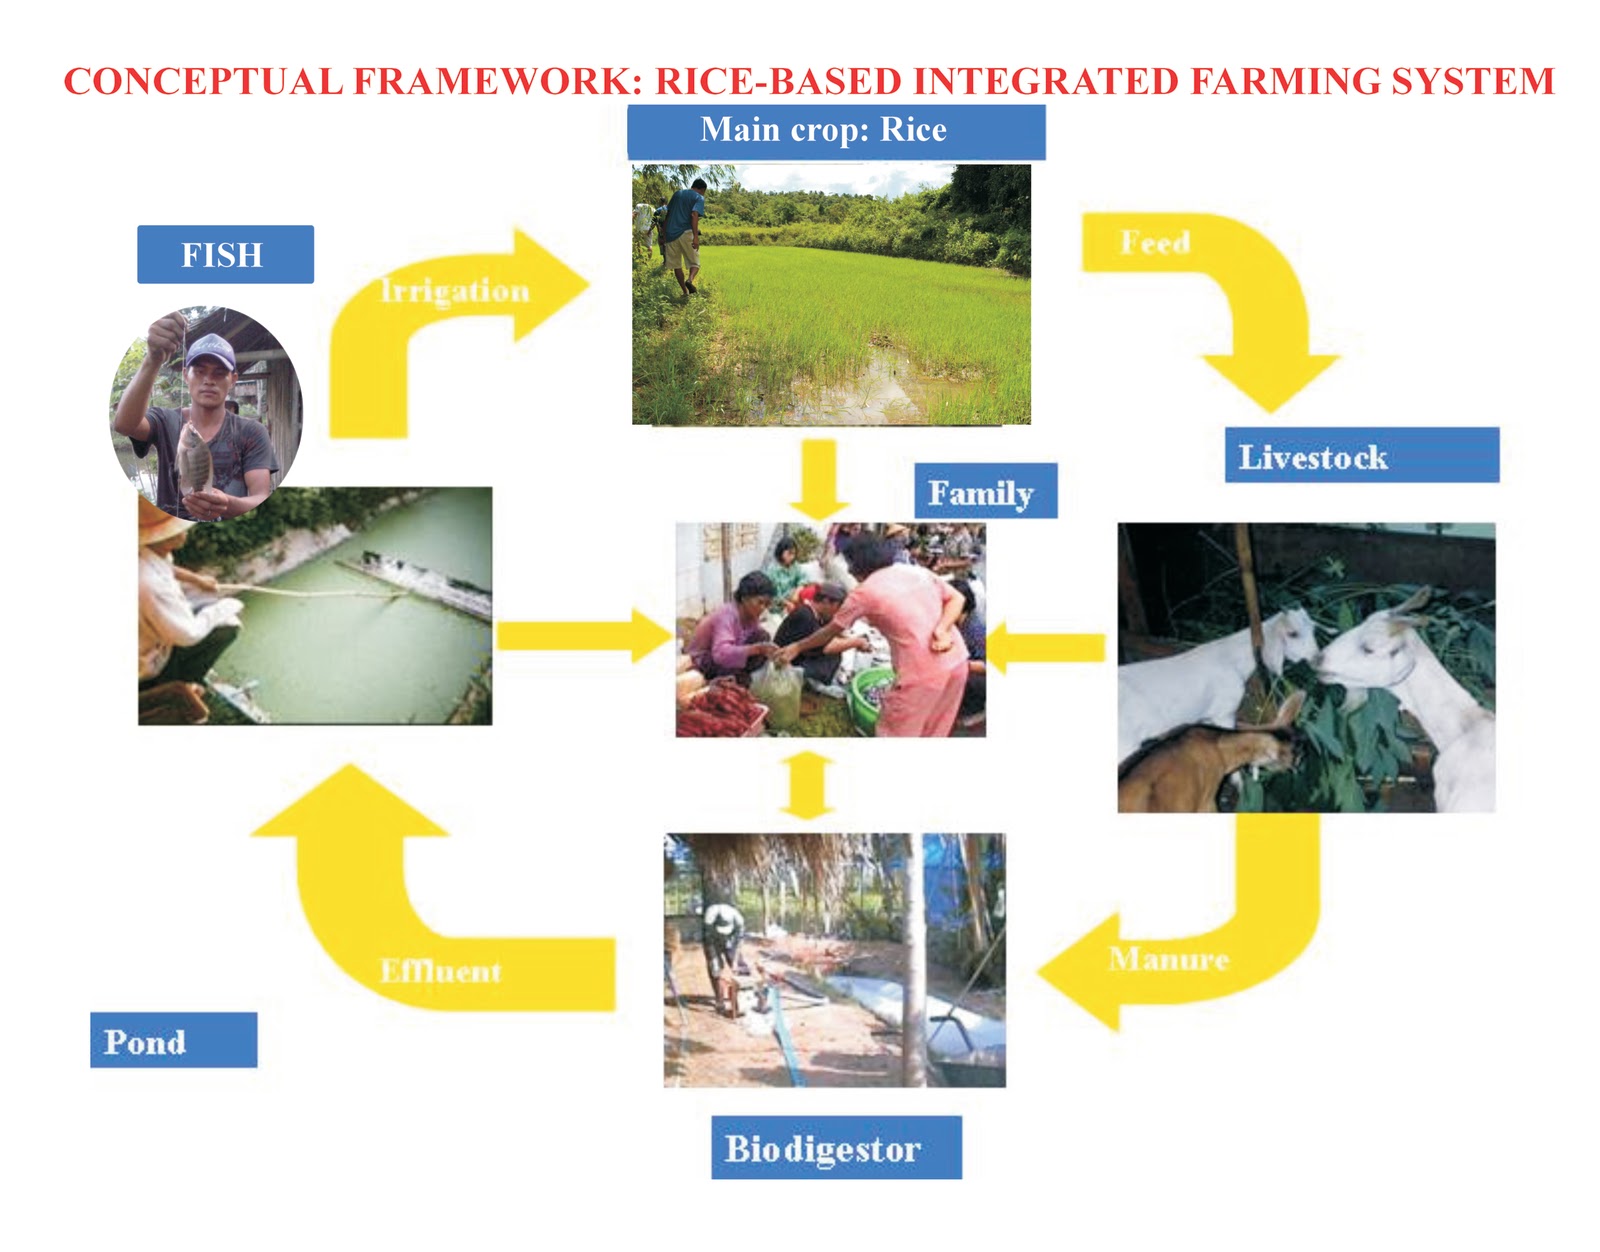 SIMPLY BUSINESS MODELING RICEBASED INTEGRATED FARMING